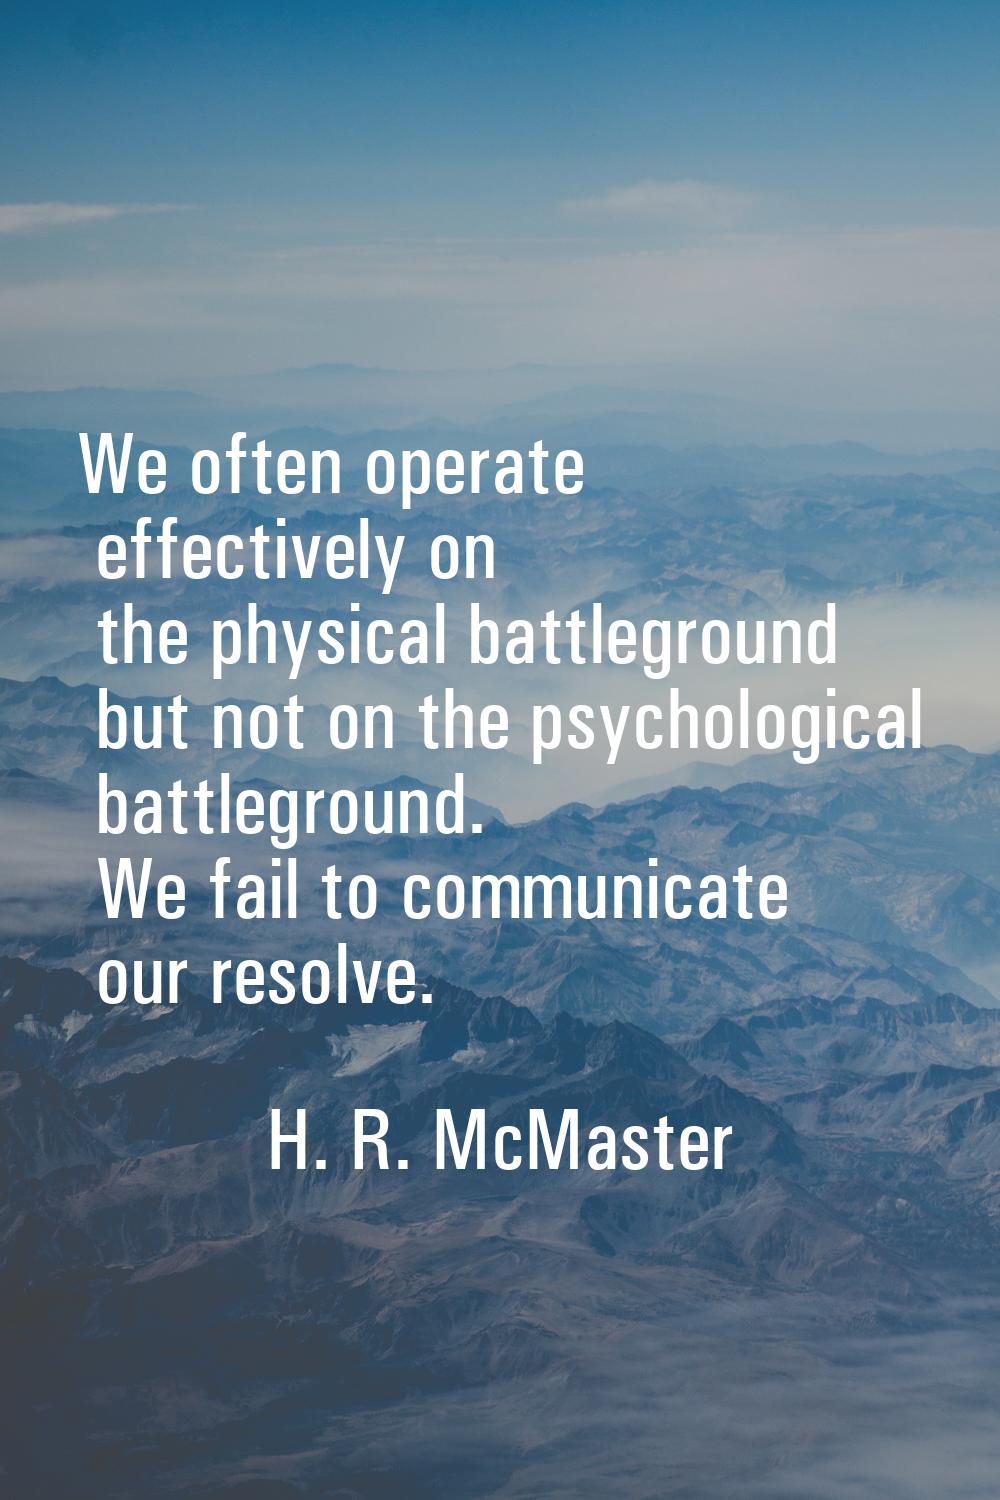 We often operate effectively on the physical battleground but not on the psychological battleground